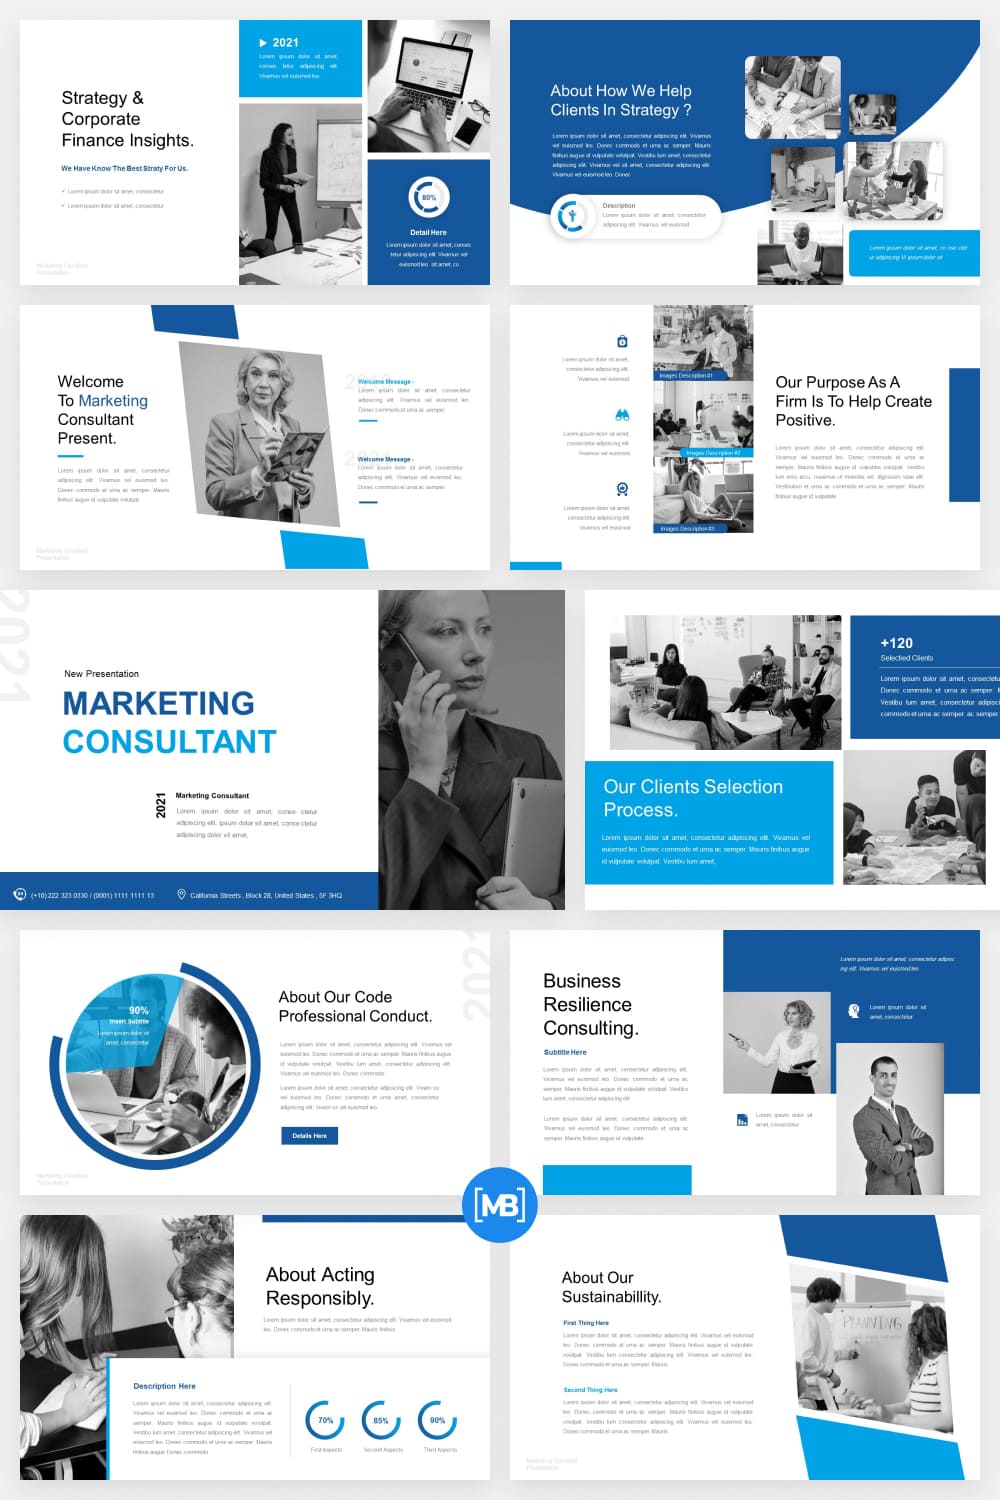 Marketing consultant powerpoint template.